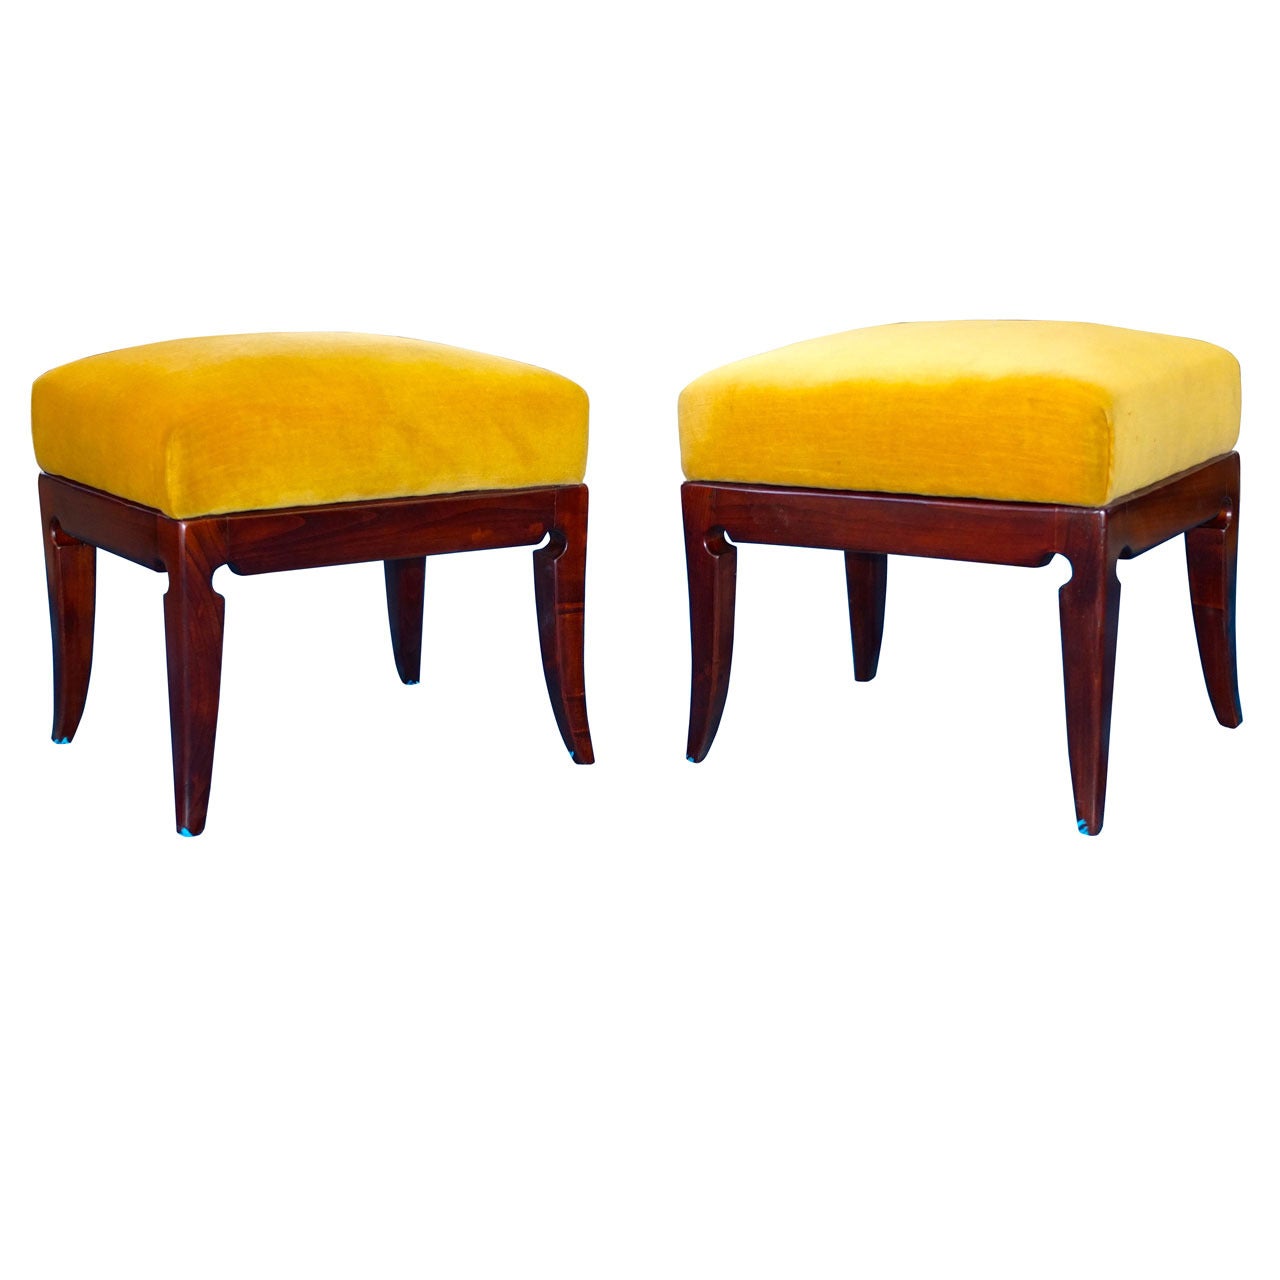 Pair of 1940's Italian Footstools For Sale